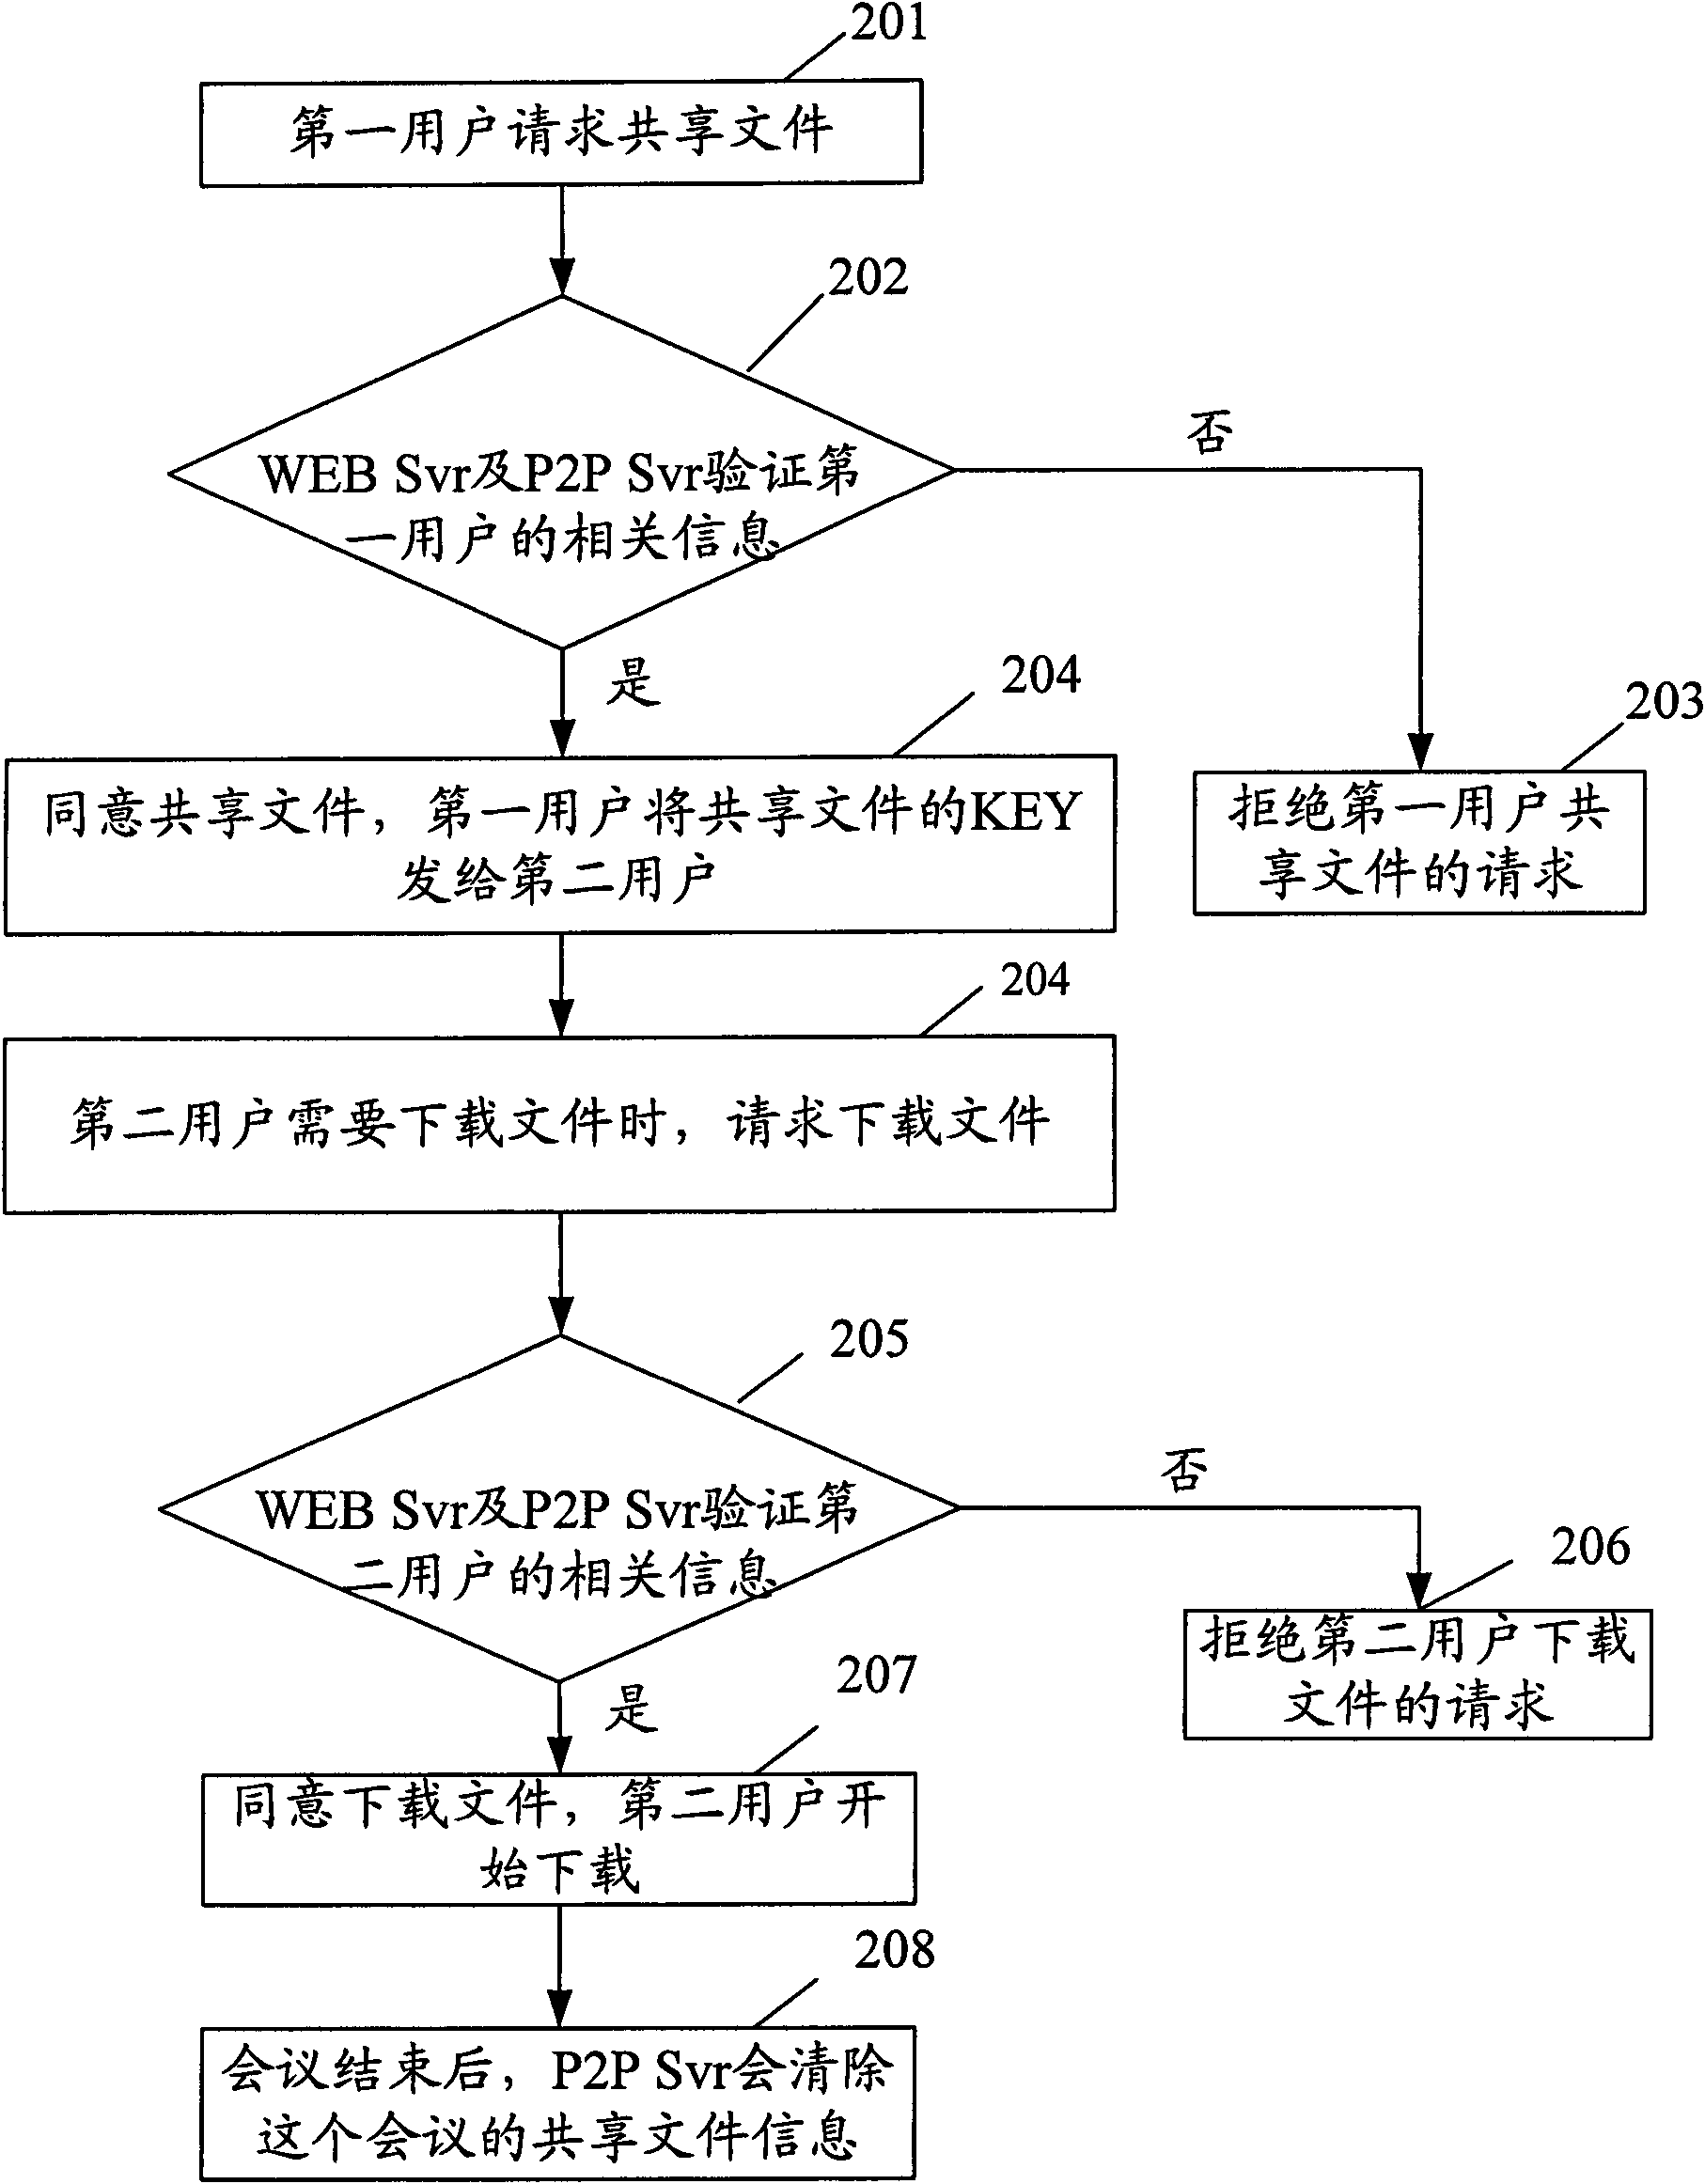 System and method using point-to-point technology to realize file sharing